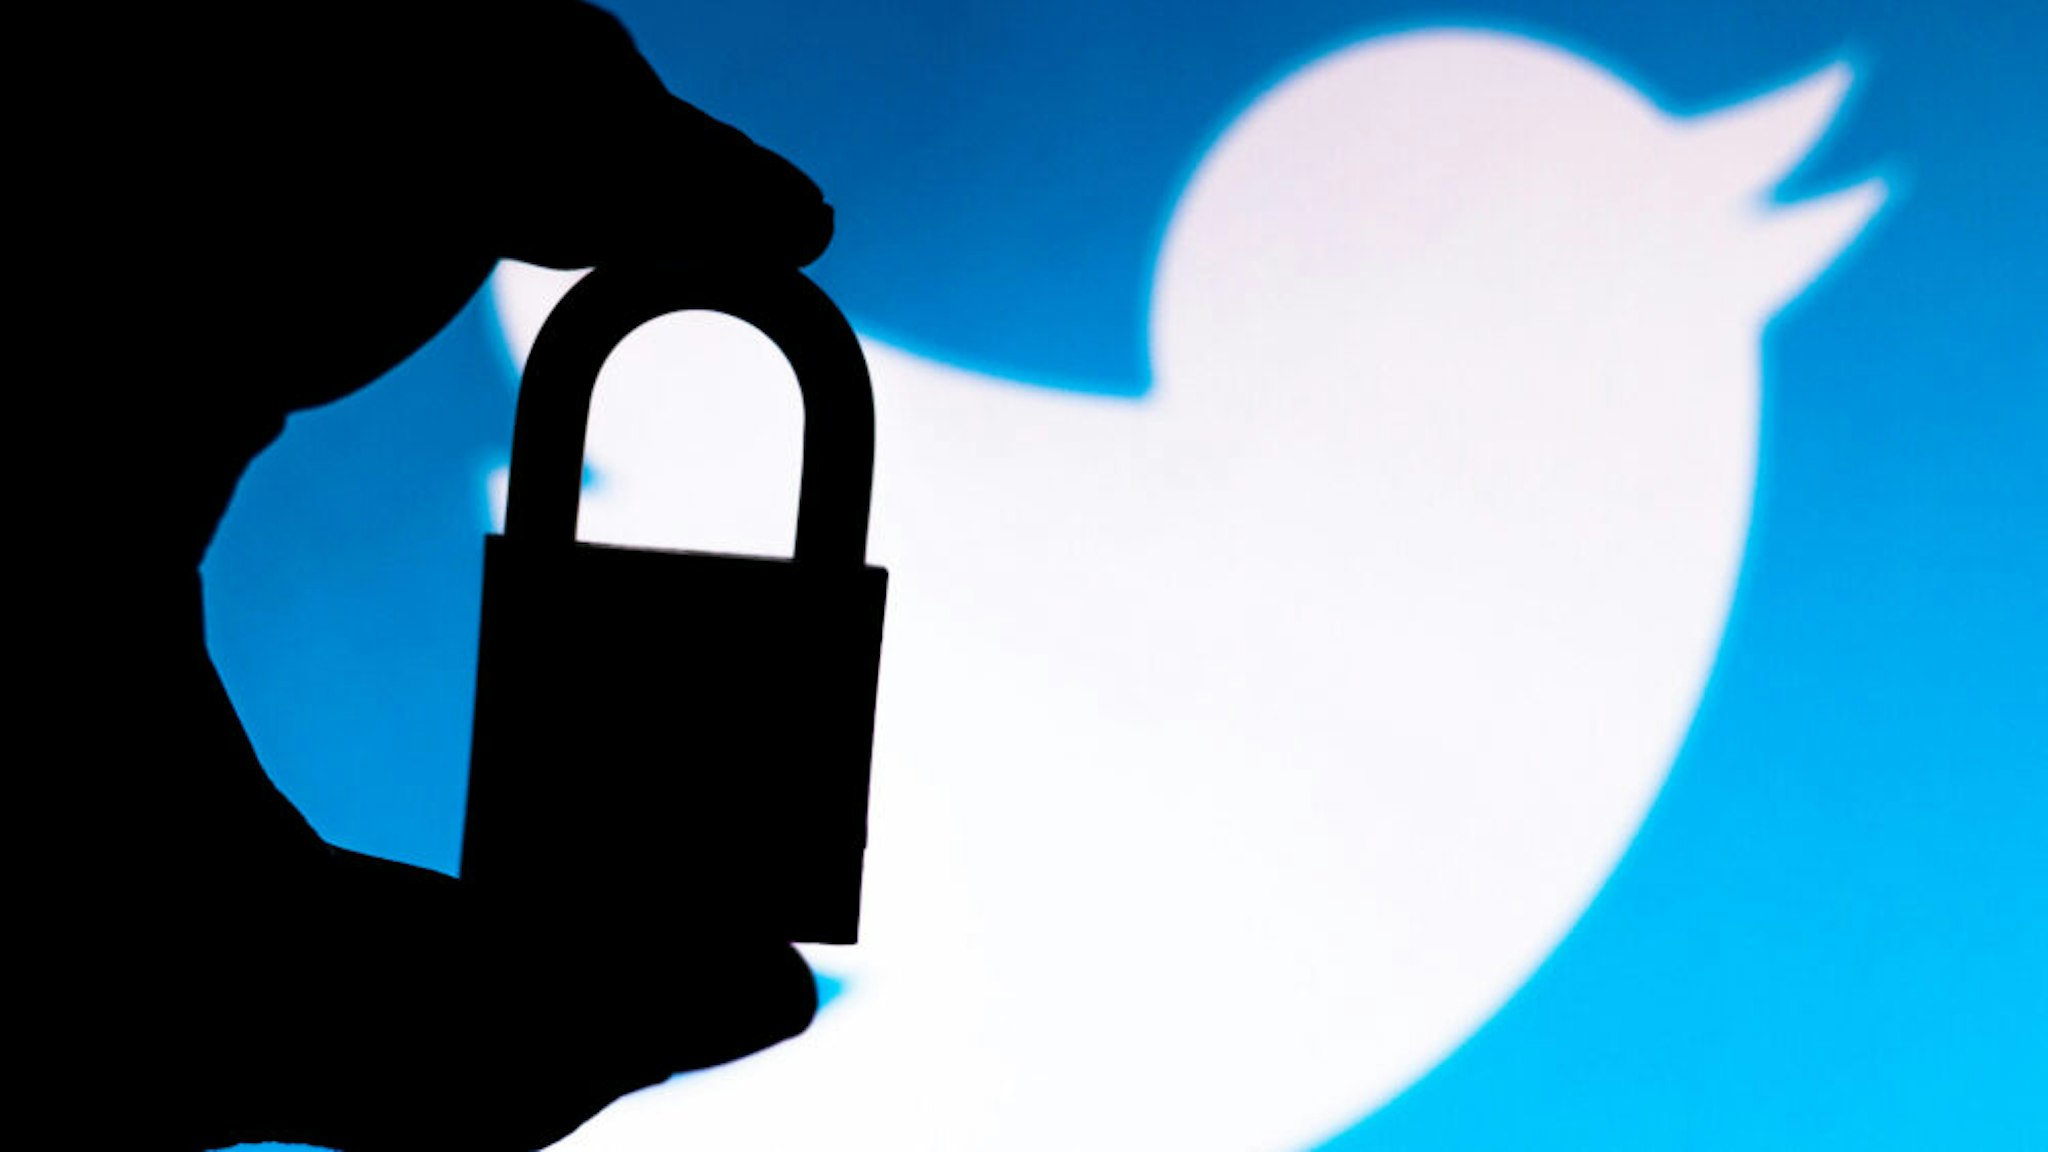 BRAZIL - 2020/07/11: In this photo illustration a padlock appears next to the Twitter logo. Online data protection/breach concept. Internet privacy issues.